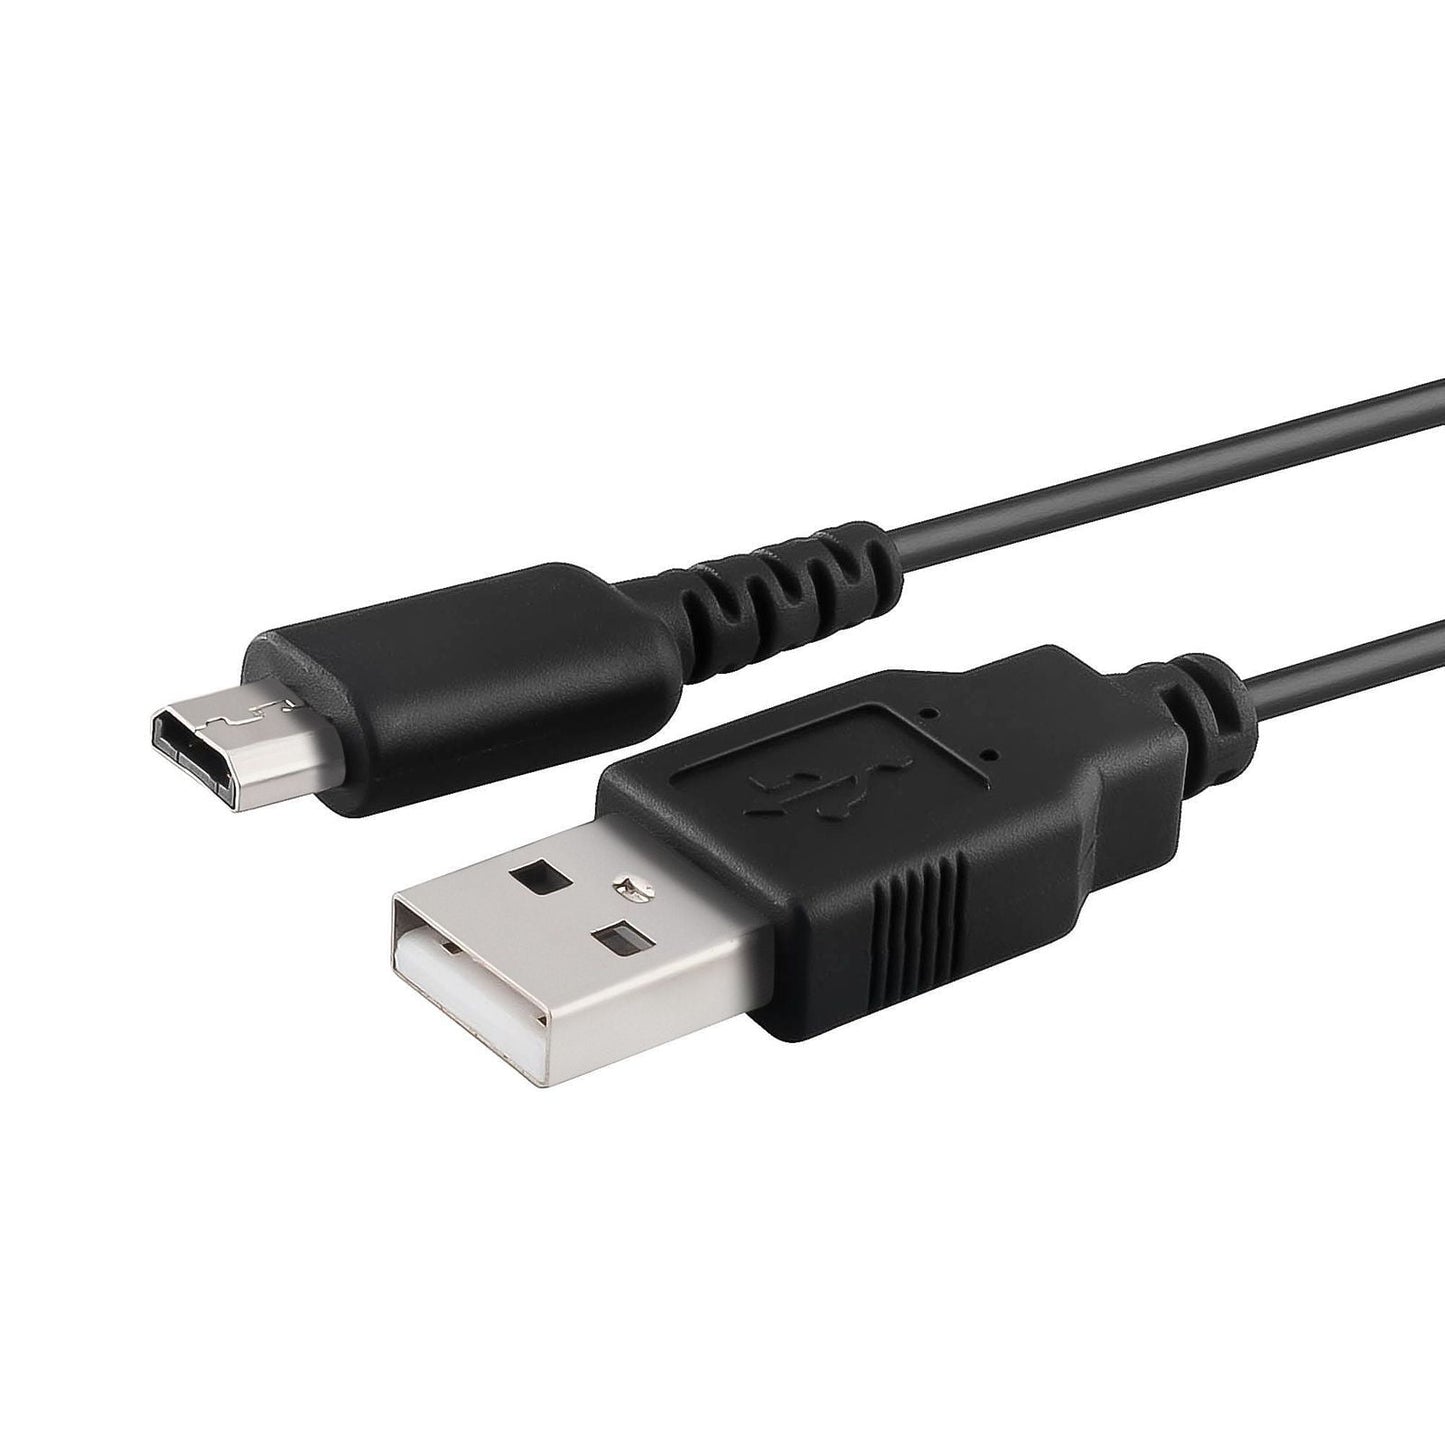 DS Lite USB Charge Cable (Tomee)